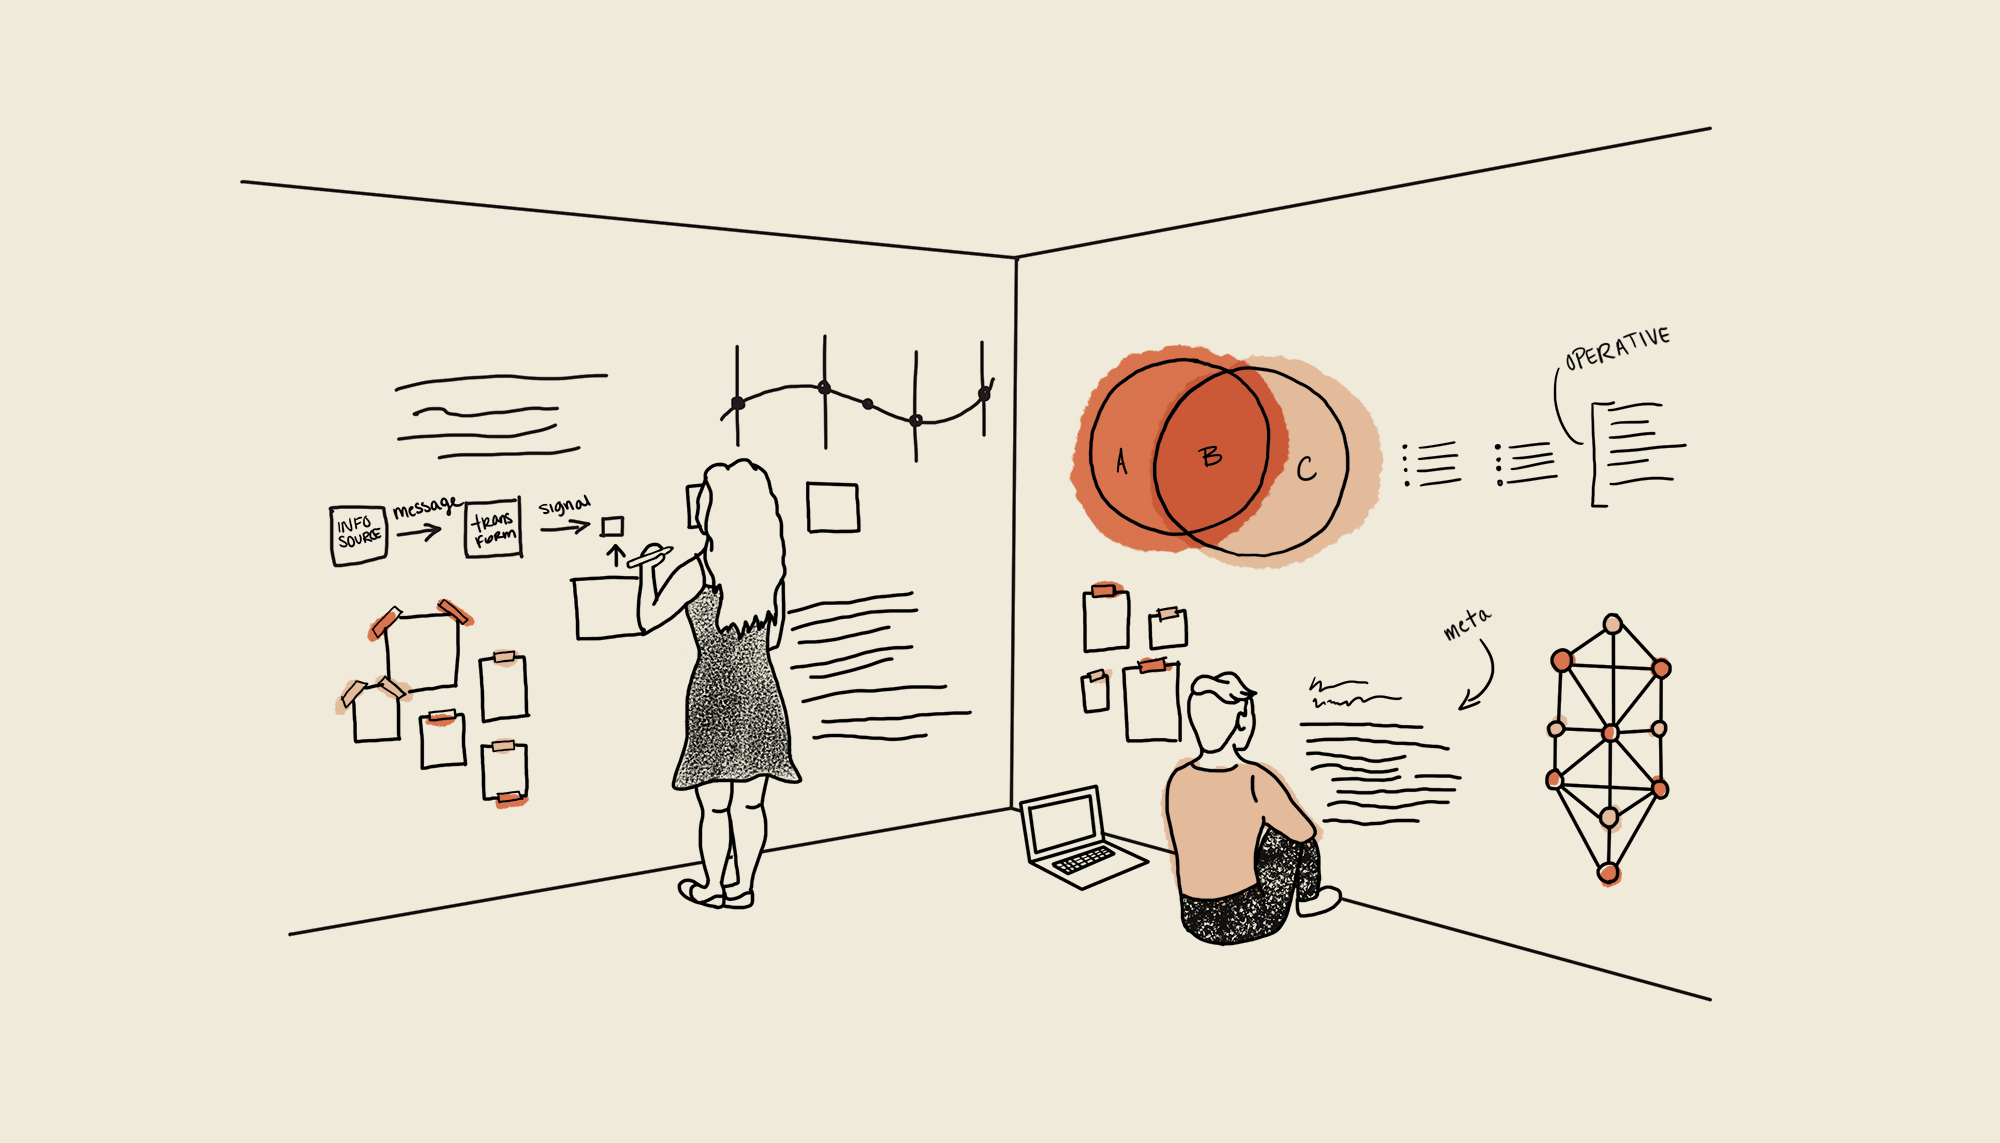 Linework animations of people working within the atmosphere of 1909, a co-working space in West Palm Beach. The animation shows people on laptops, people working around a table, their hang-out space, and their think tank whiteboard room.